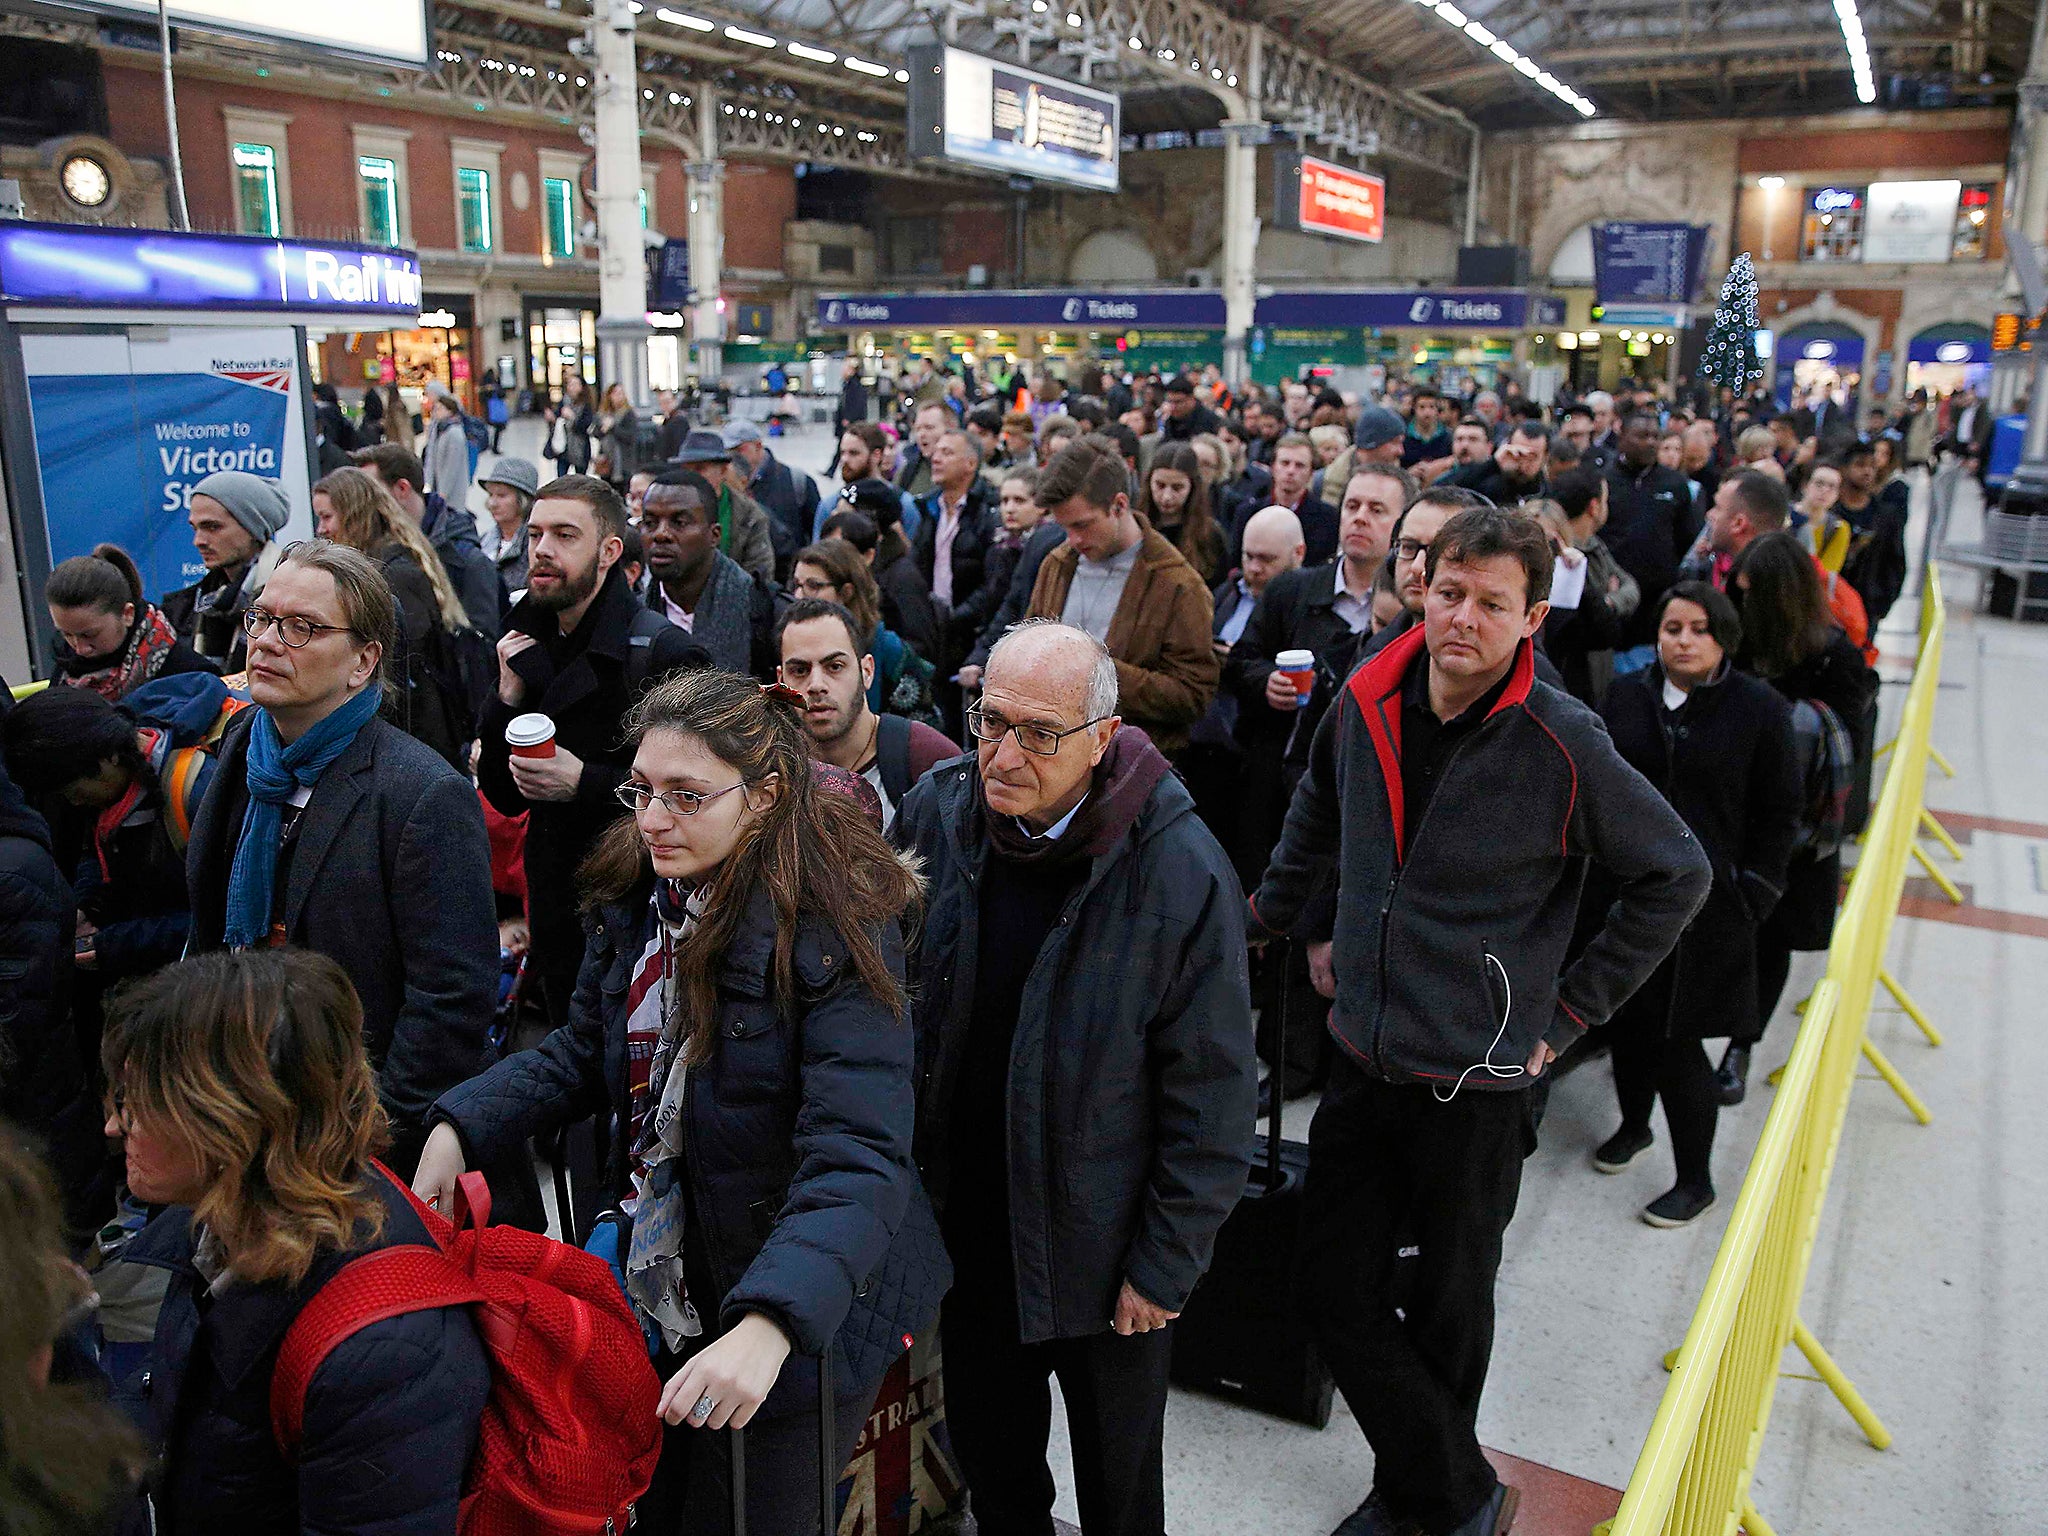 Rail passengers have been hit by travel chaos as striking train drivers bring the Southern network to a halt.